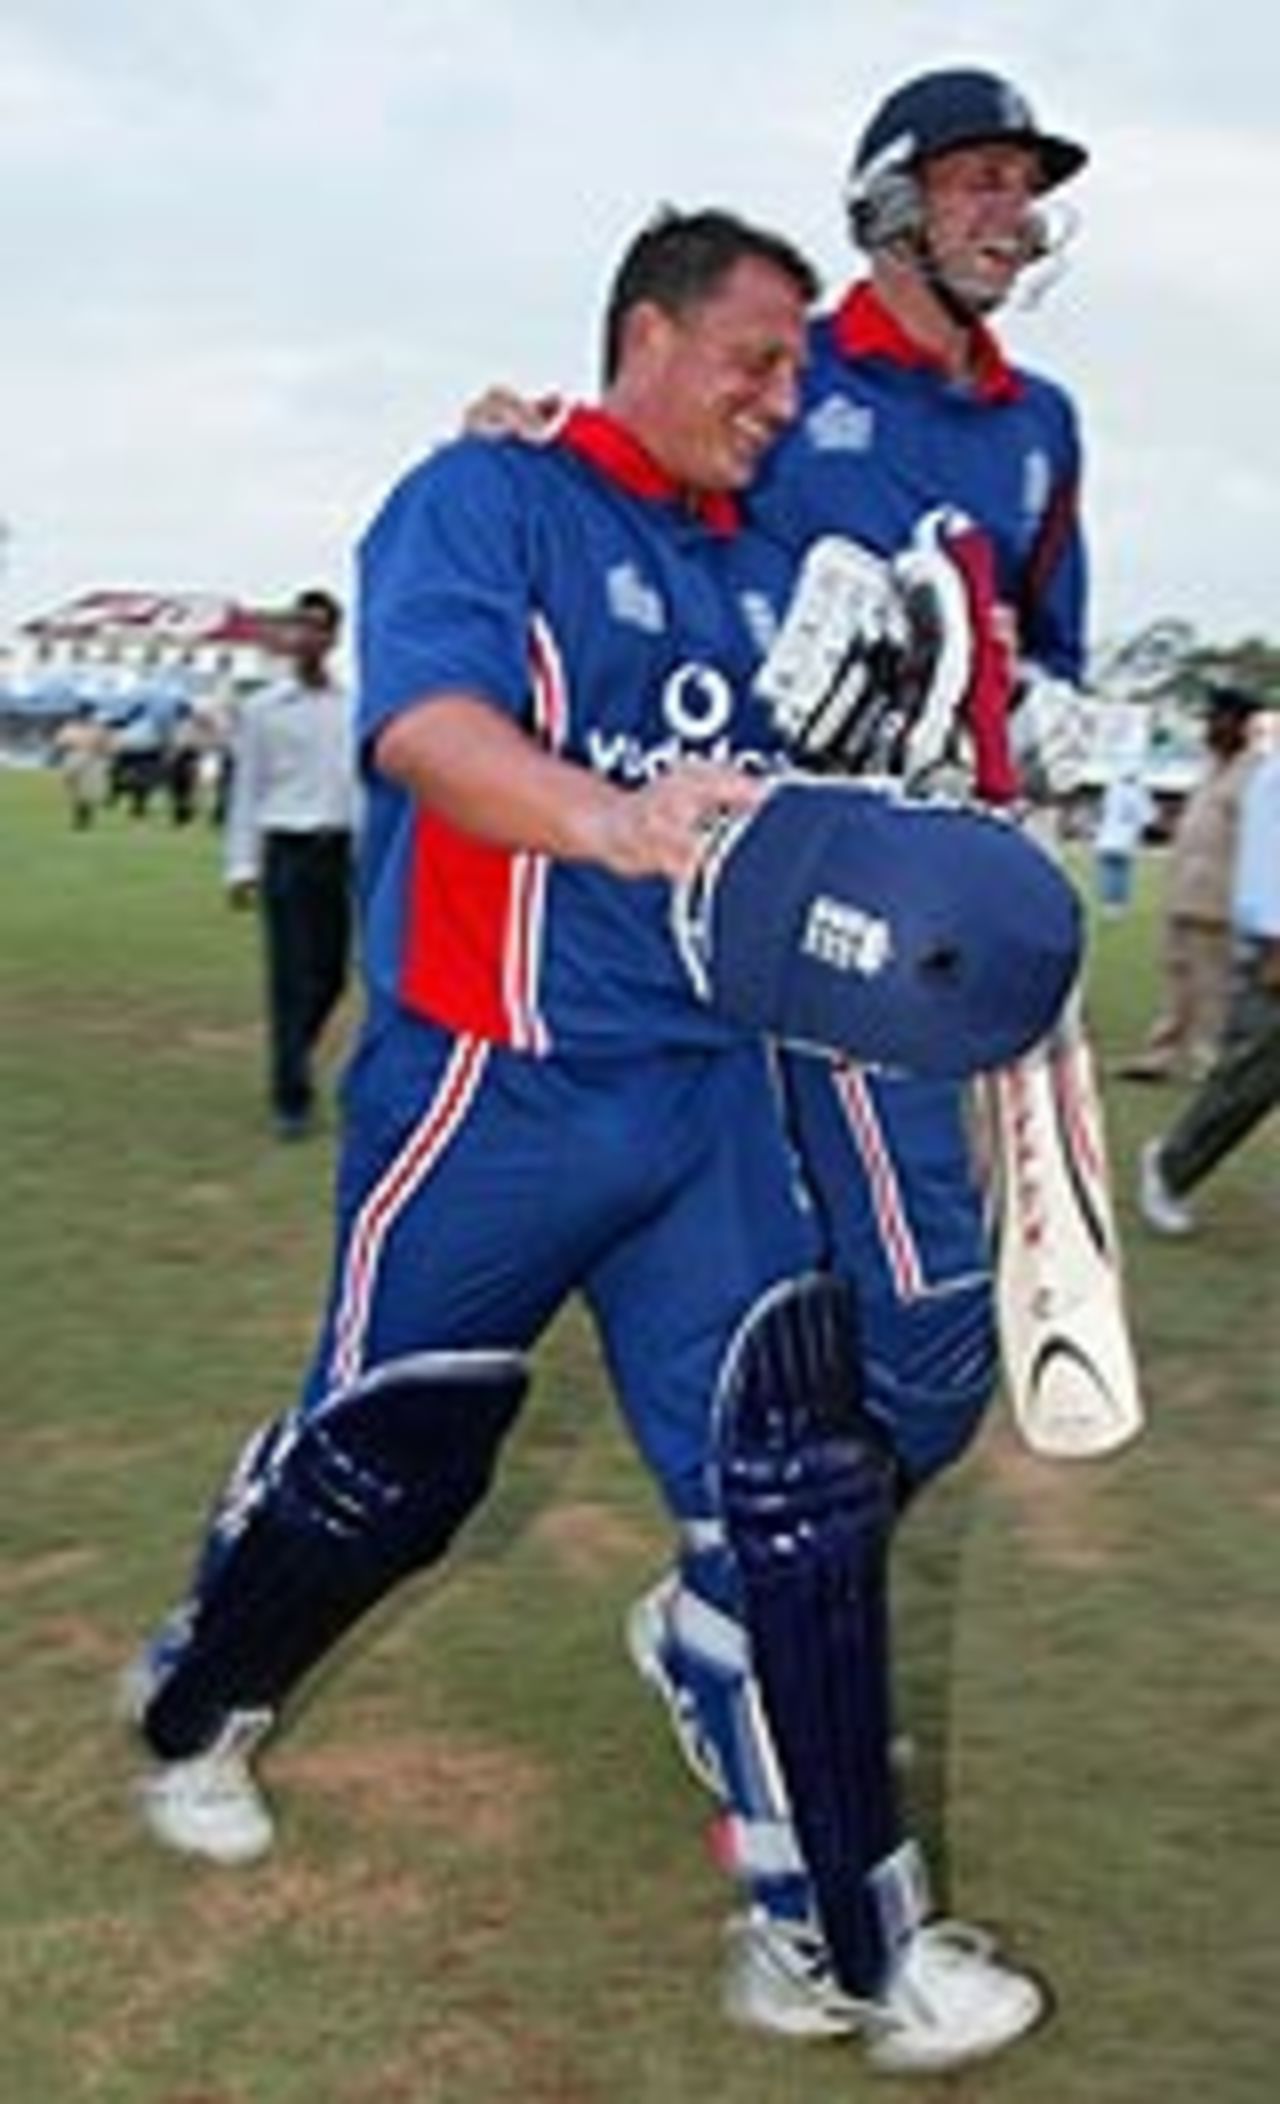 Darren Gough and Stephen Harmison leave the field after England's thrilling two-wicket win